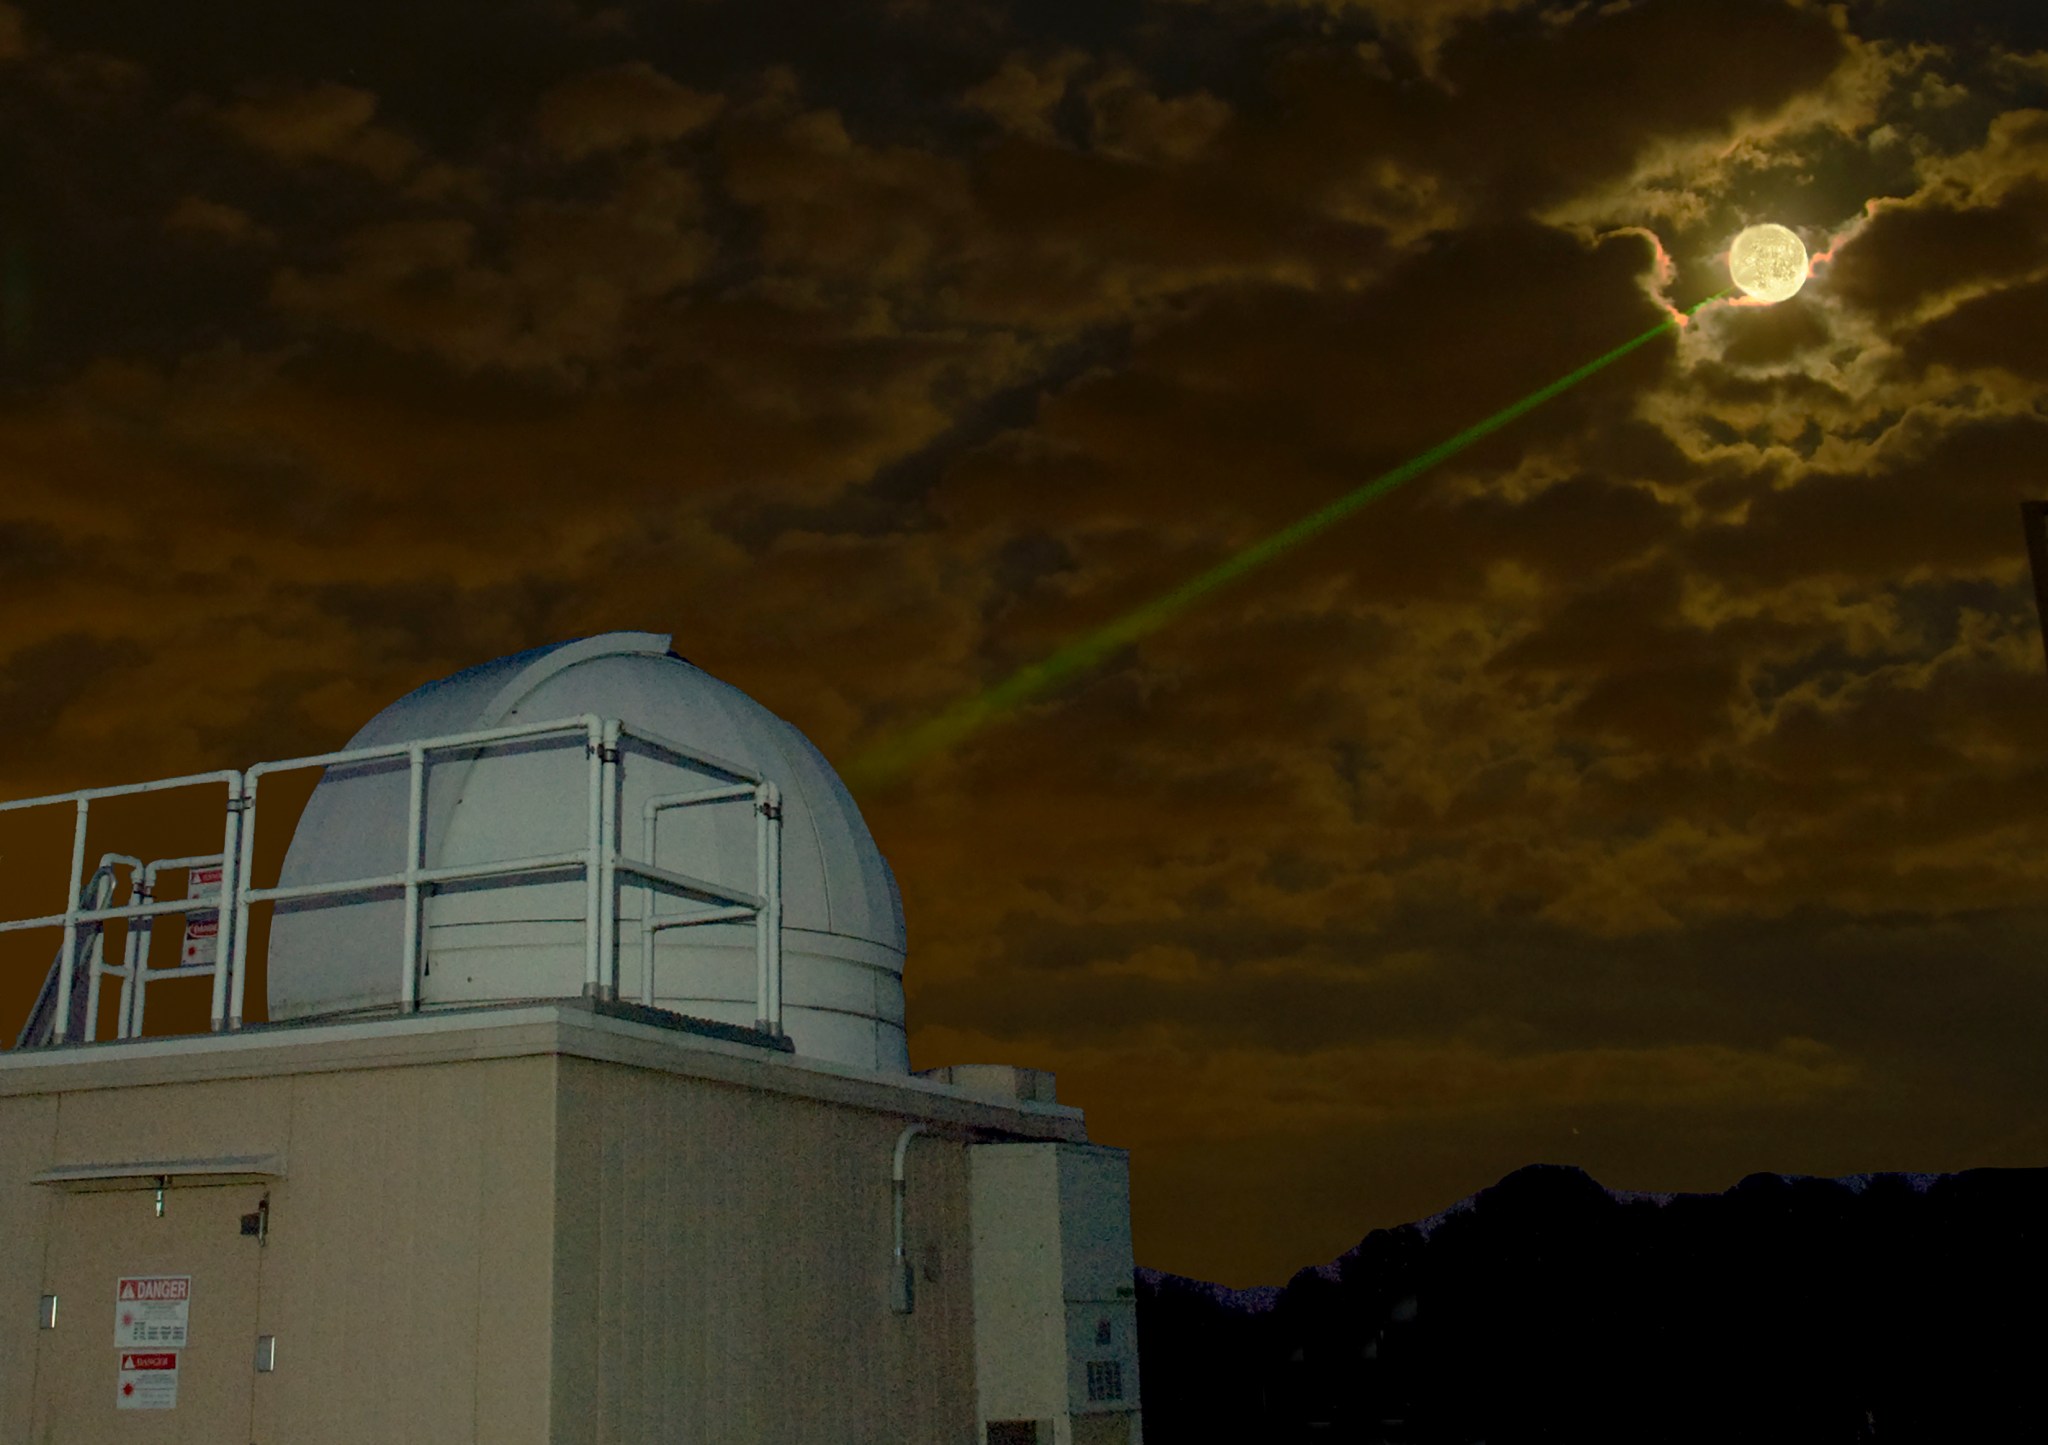 image of building with green laser pointing towards the Moon